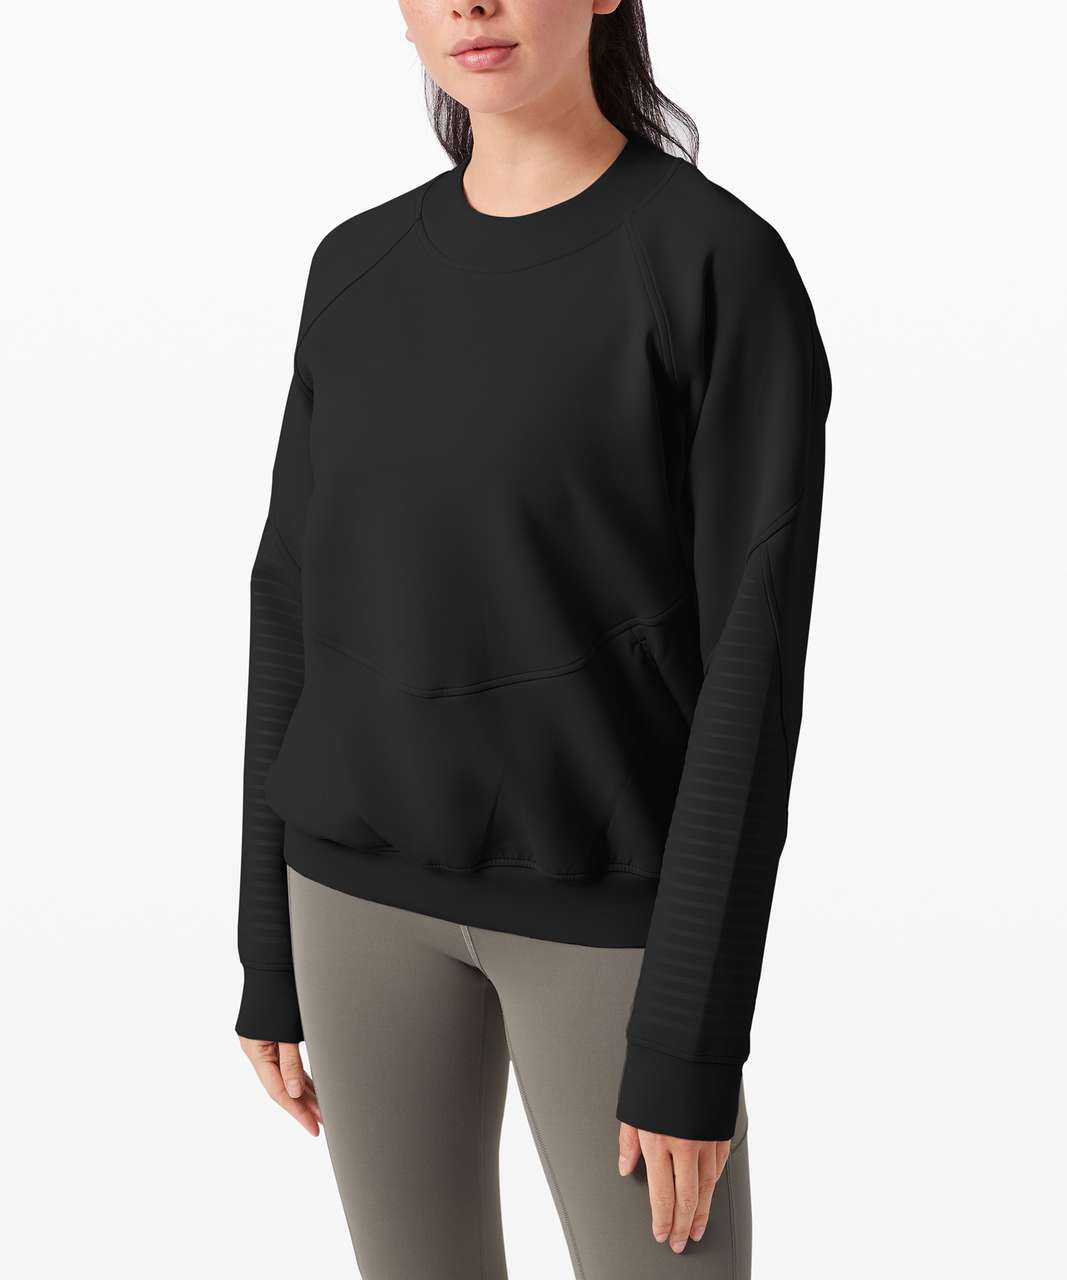 Is fit of city sweat crew similar to city sweat hoodie? : r/Lululemen